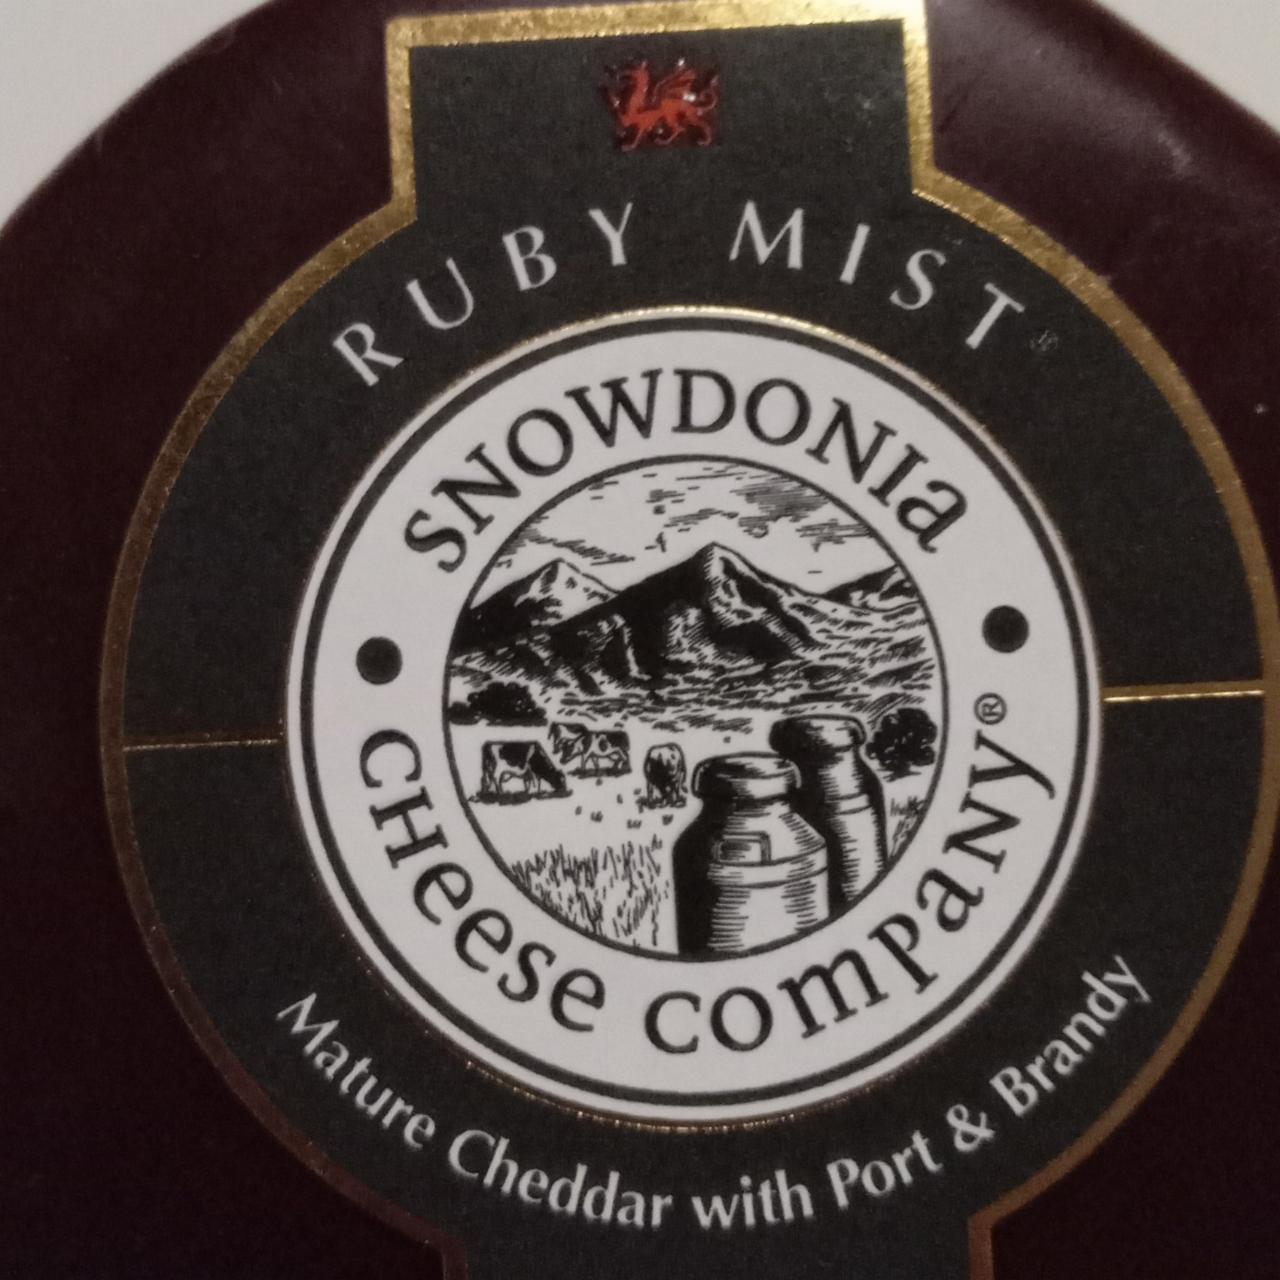 Fotografie - Ruby Mist Mature Cheddar with Port & Brandy Snowdonia Cheese Company